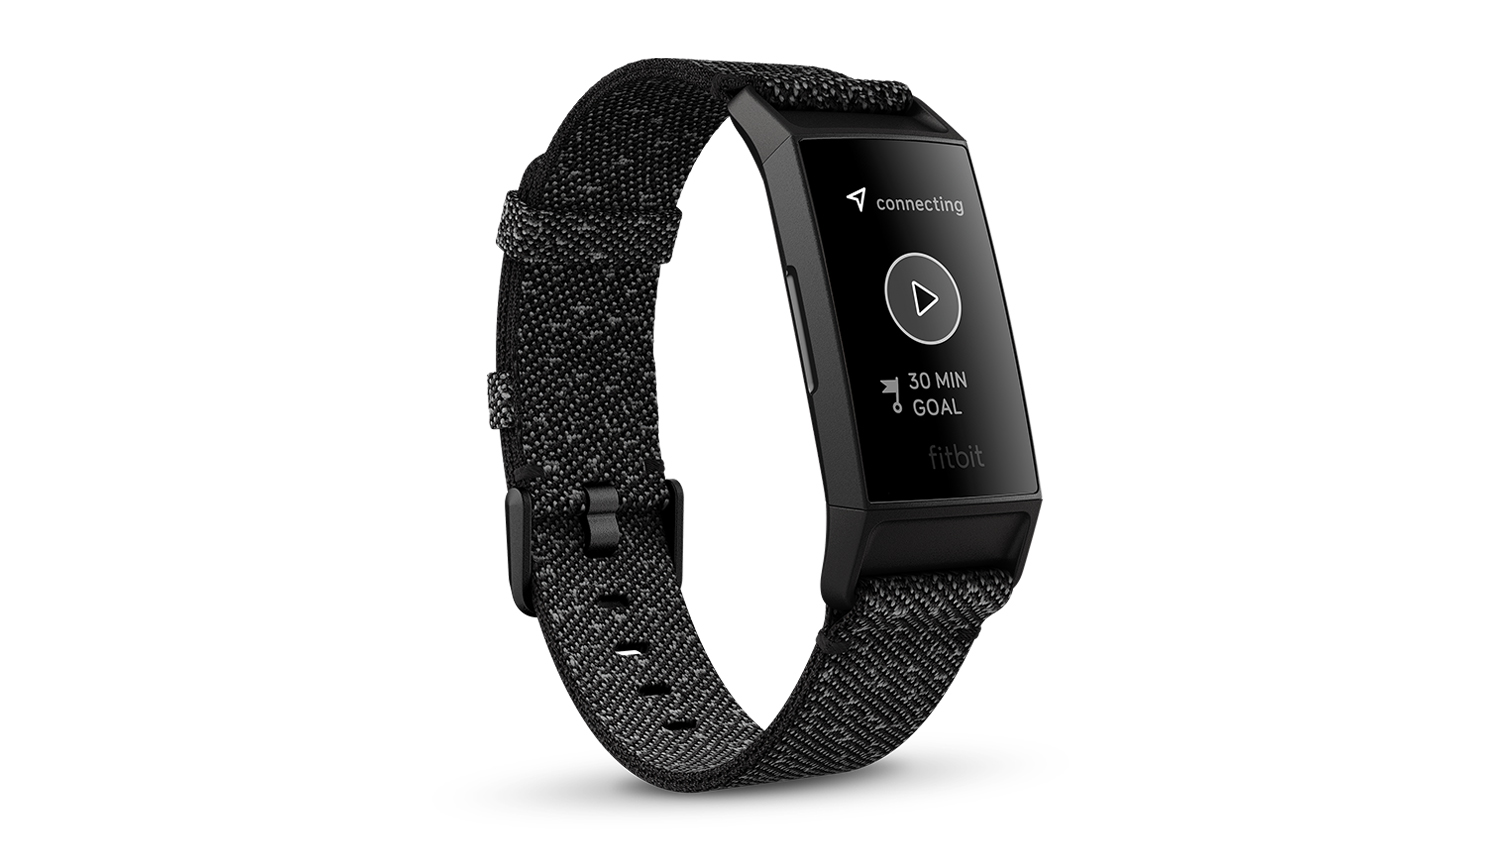 charge 4 fitbit nz